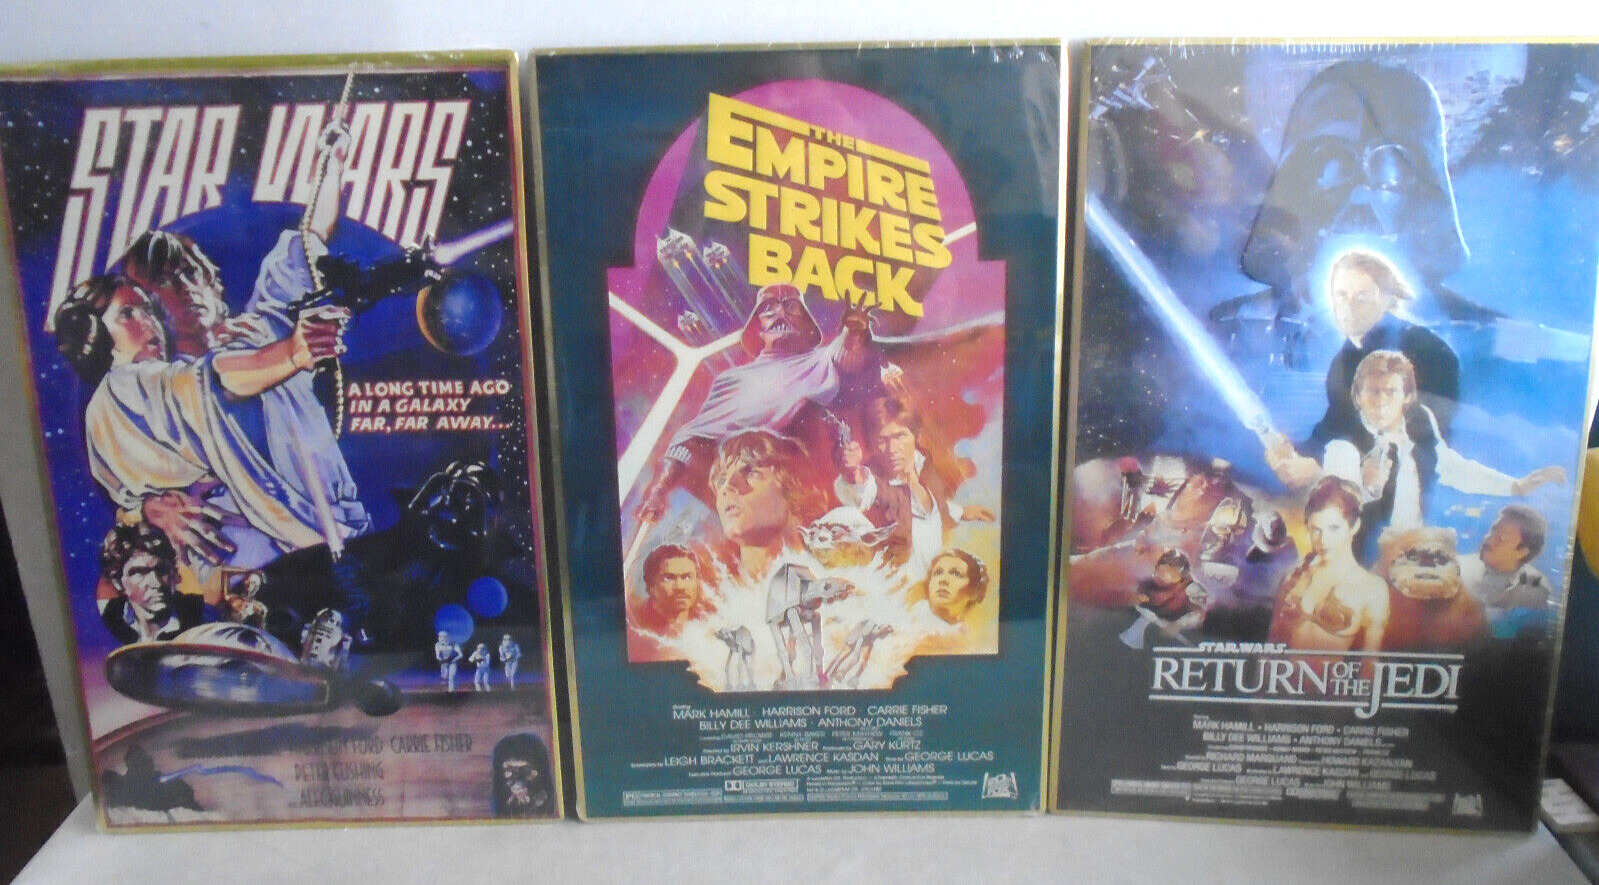 LOT OF 3 THE STAR WARS TRILOGY COLLECTIBLE METAL MOVIE POSTER TIN SIGNS ROTJ